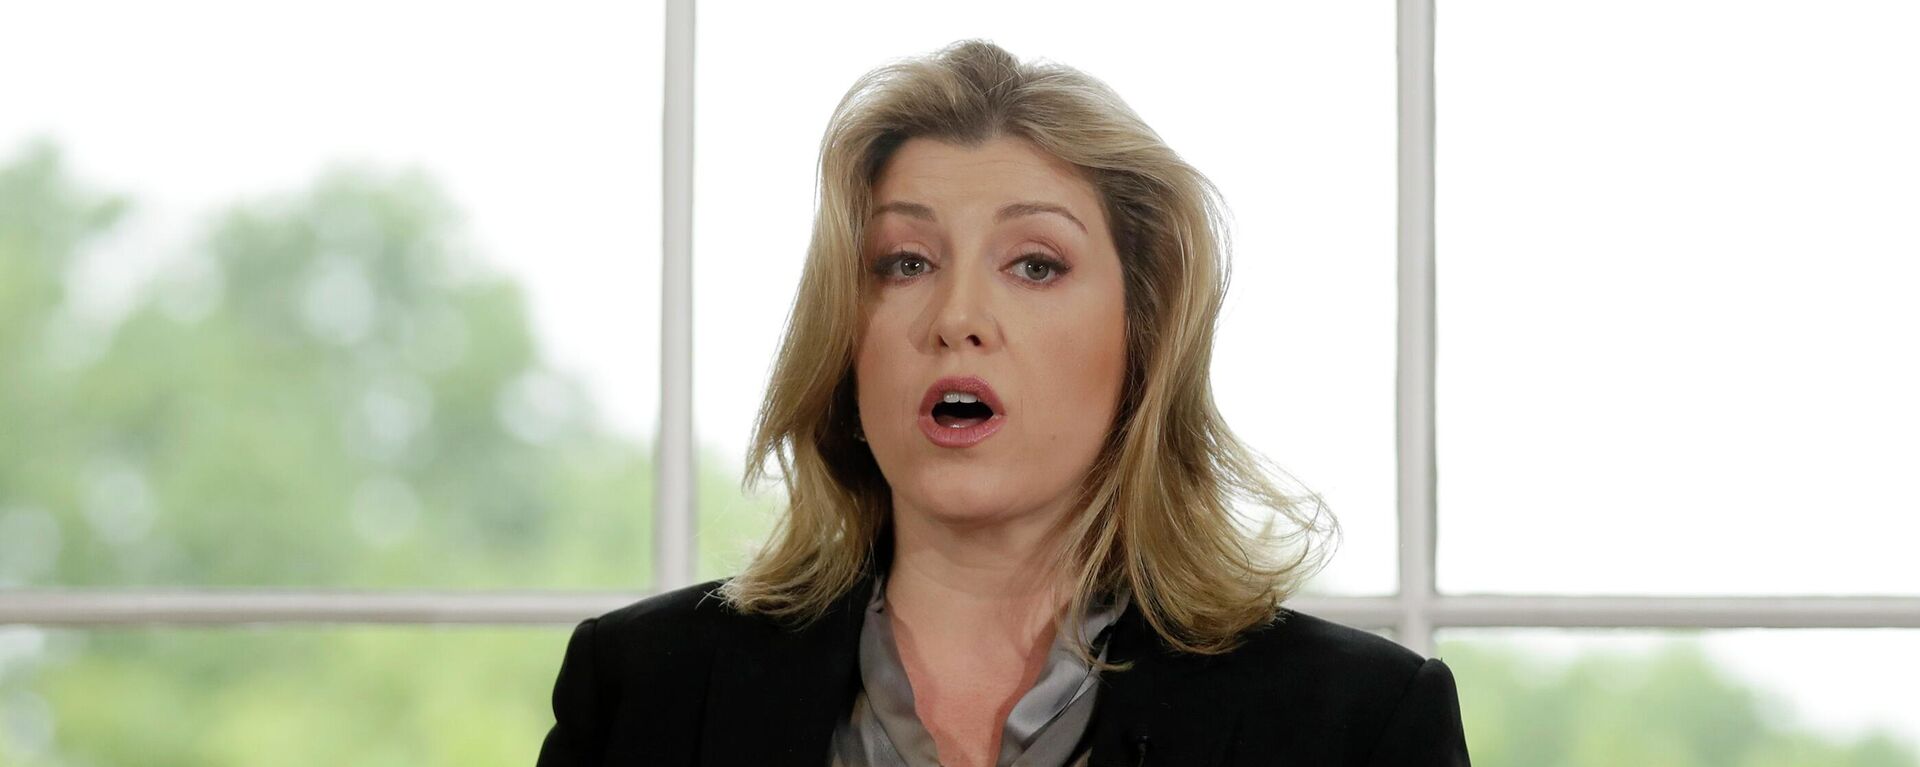 Penny Mordaunt speaks ahead of Foreign Secretary Jeremy Hunt launching his leadership campaign for the Conservative Party in London, June 10, 2019 - Sputnik International, 1920, 21.10.2022